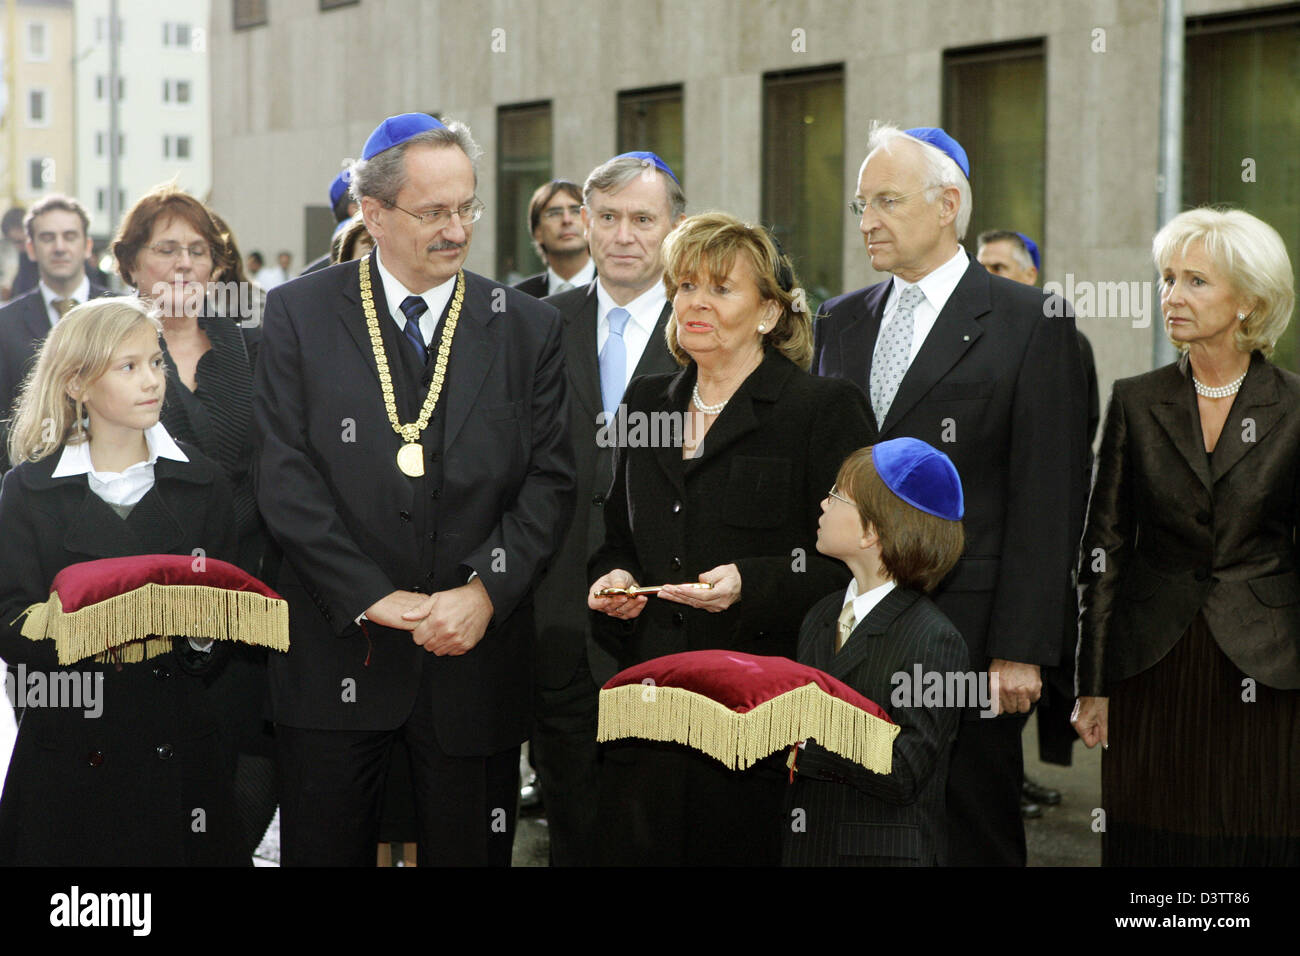 President of the Central Council of Jews in Germany, Charlotte Knobloch, holds on to the key of the new main synagogue, while standing next to Munich's mayor Christian Ude, German President Horst Koehler (C, back), Bavarian Prime Minister Edmund Stoiber (2-R, back) and his wife Karin (R) in Munich, Germany, Thursday, 09 November 2006. The synagogue had been destroyed by the Nazis f Stock Photo